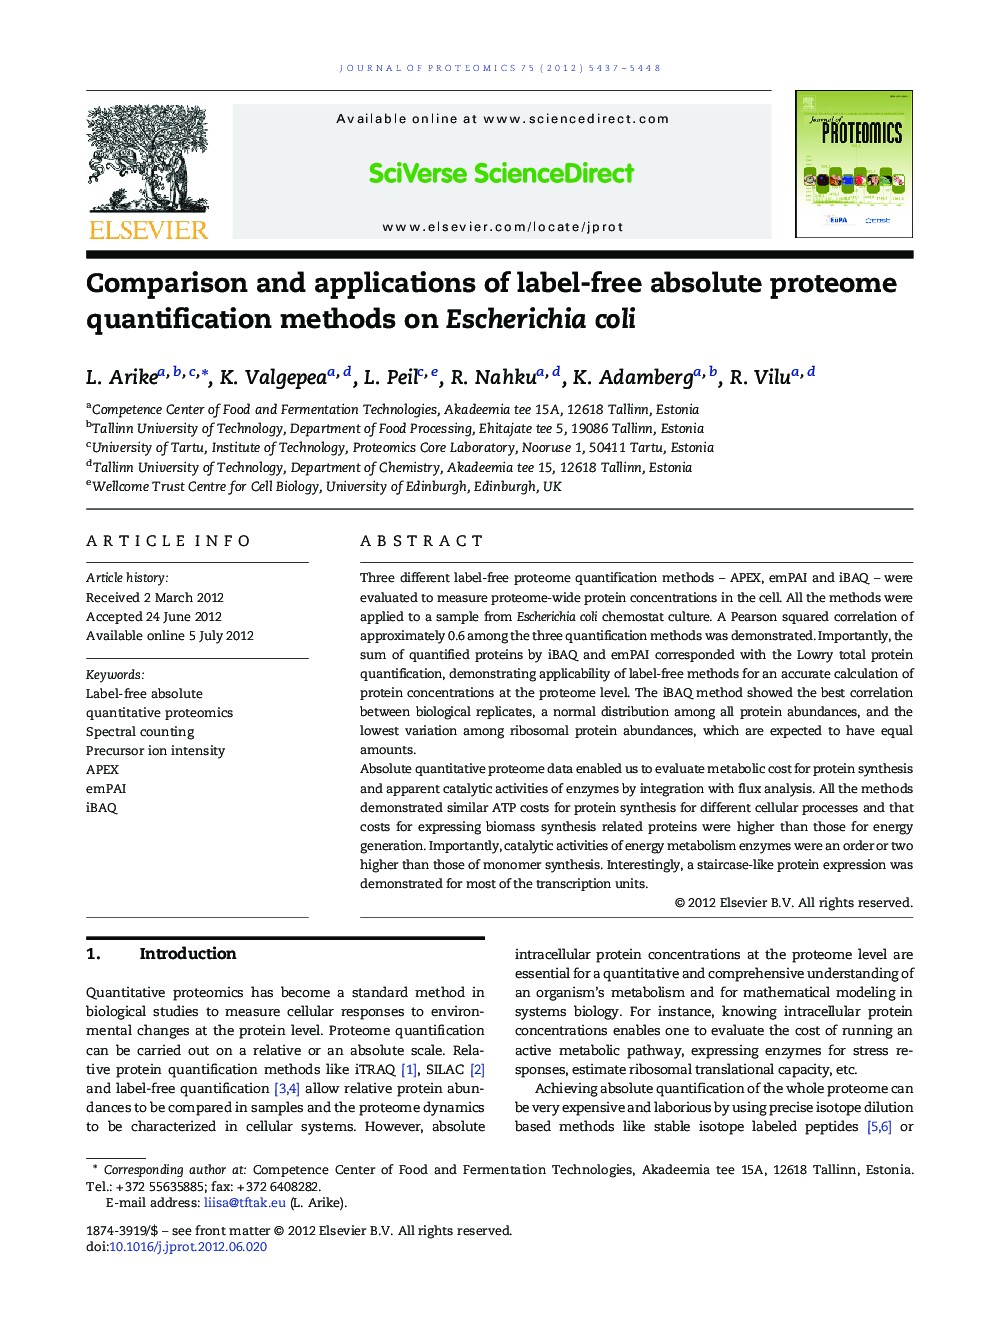 Comparison and applications of label-free absolute proteome quantification methods on Escherichia coli